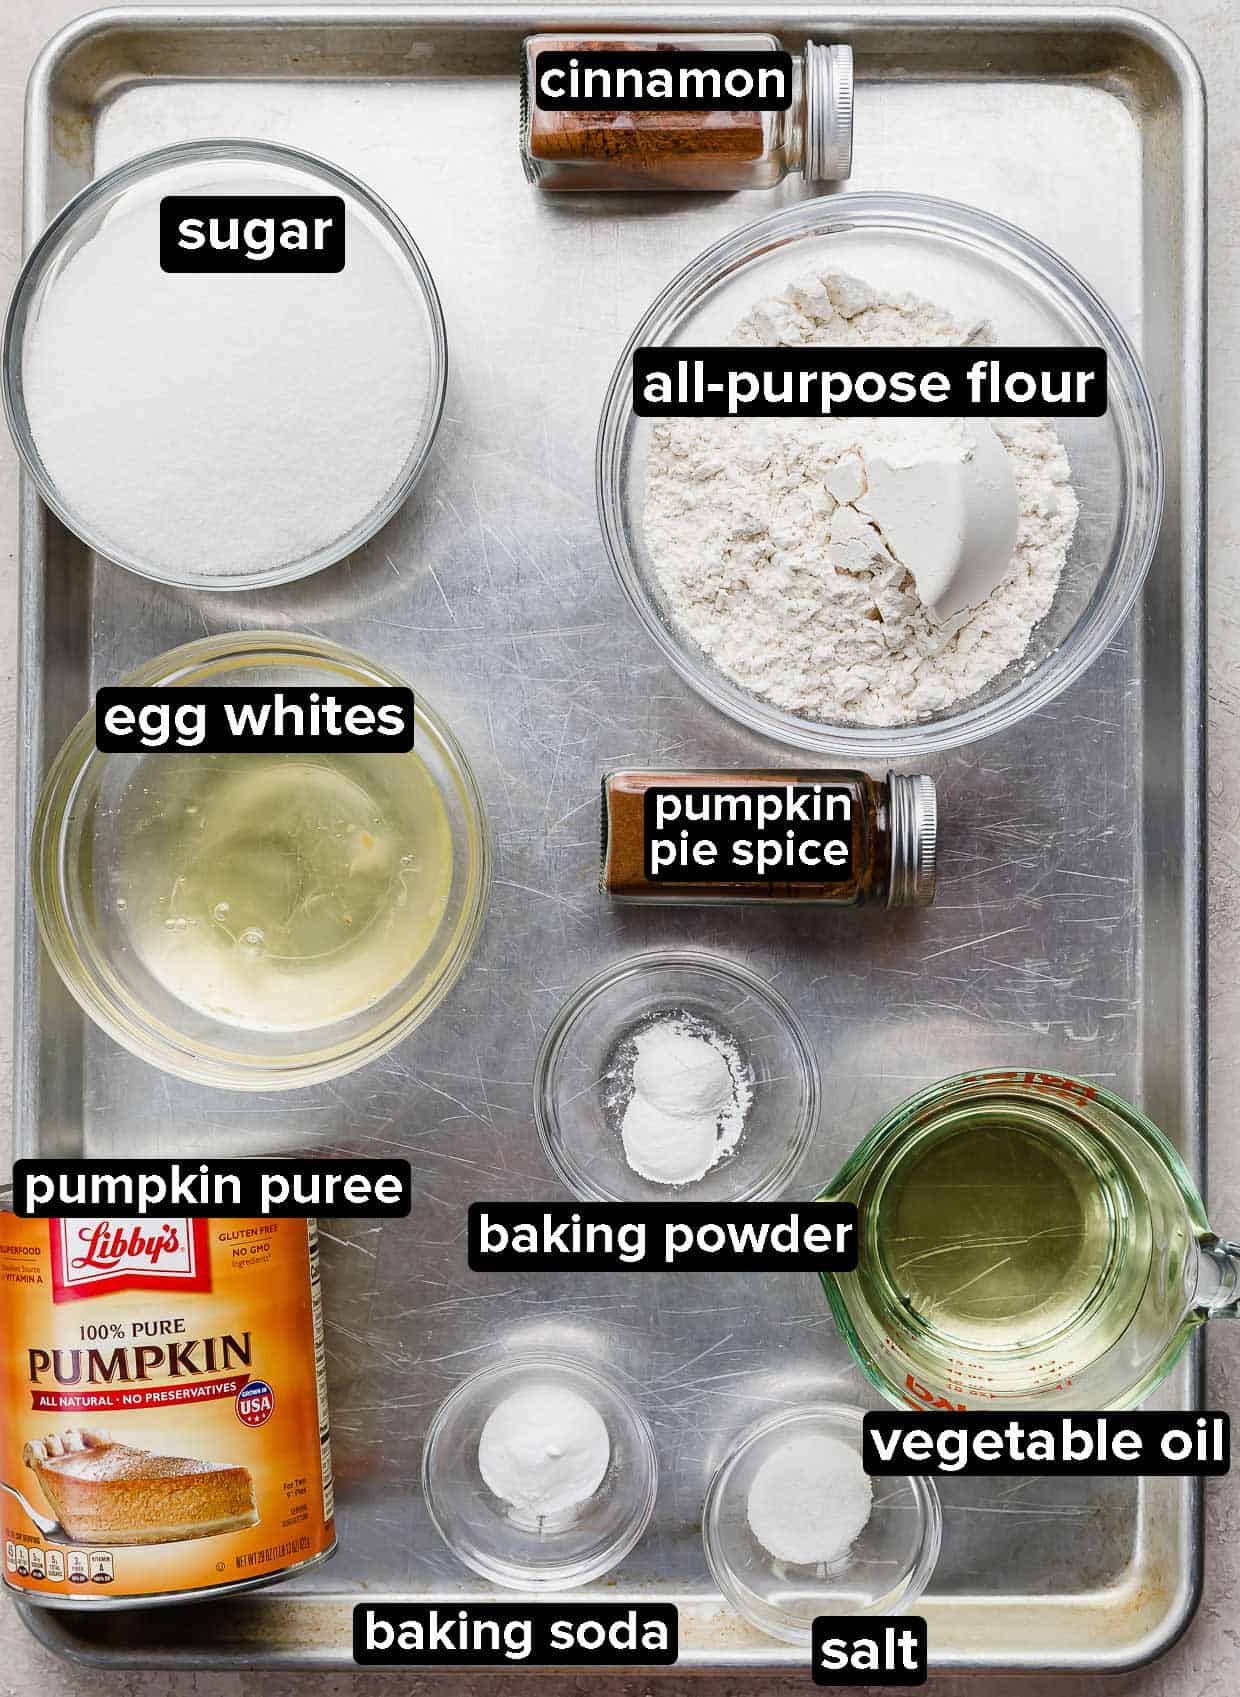 Pumpkin Bars ingredients using Libby's pumpkin puree portioned into glass bowls on a metal baking sheet.